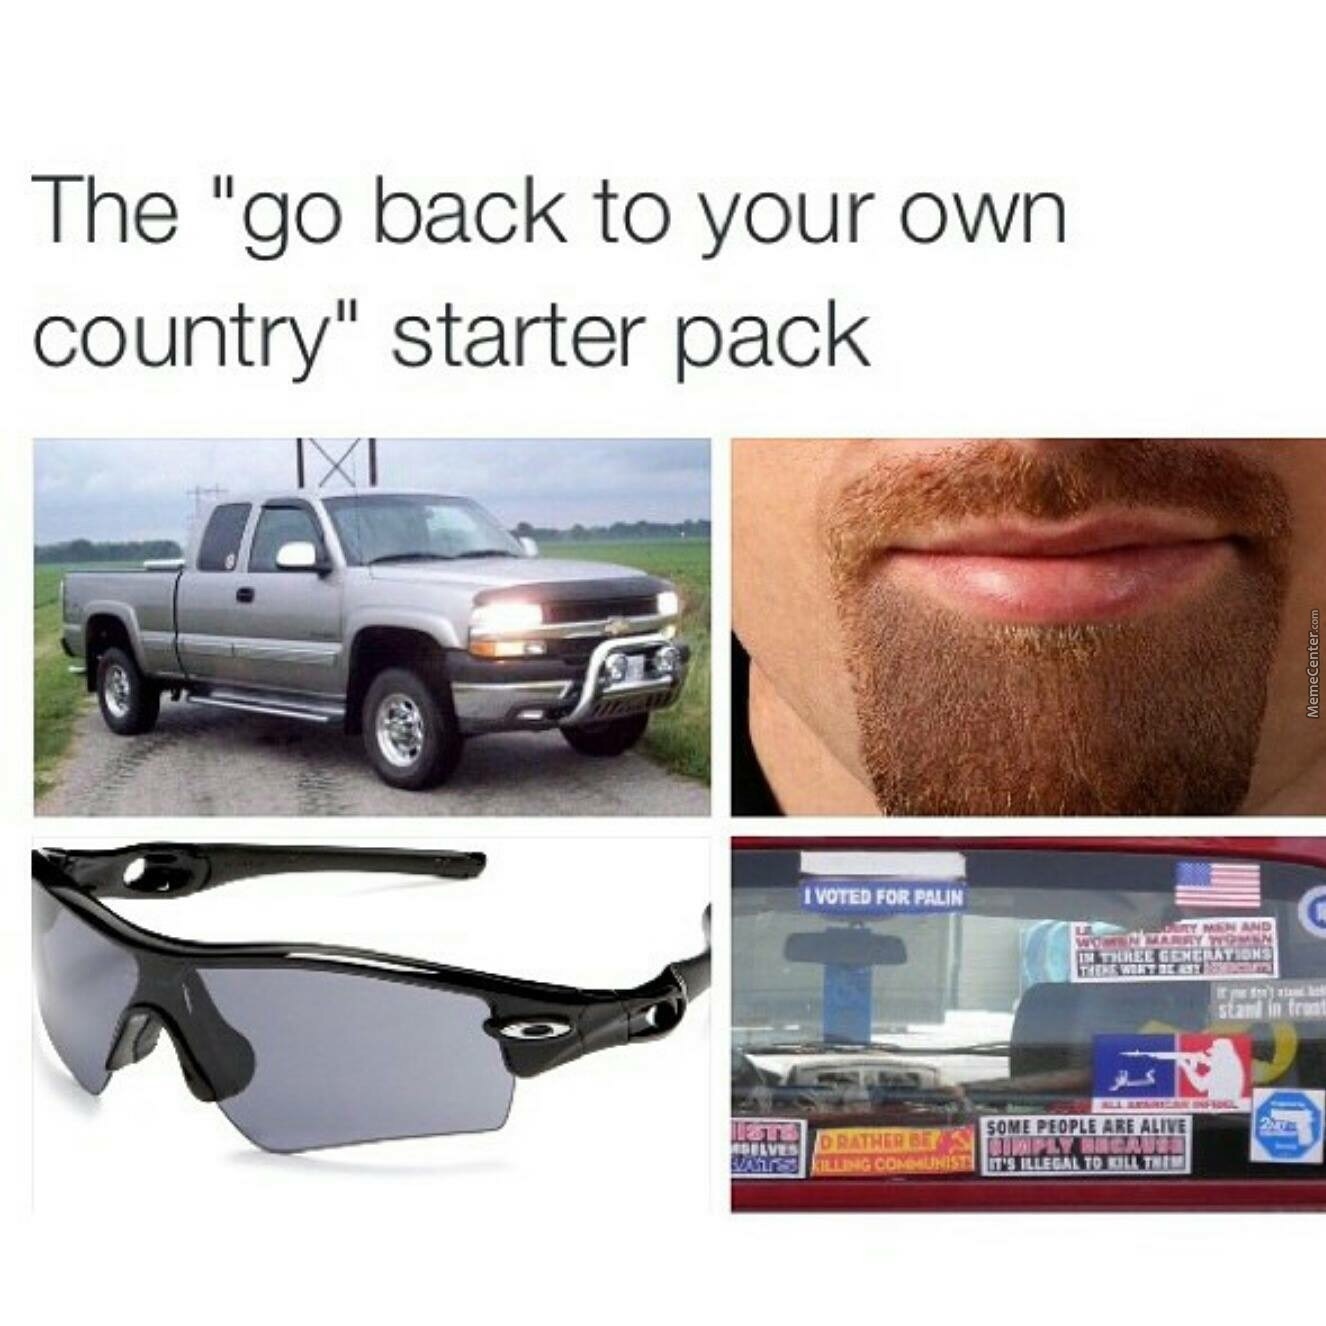 go back to your country starter pack - The "go back to your own country" starter pack MemeCenter.com I Voted For Palin wide Flere stan in tre Some People Are Alive D Rather Bet Dans Ing Commun It'S Illegal To Oli Tni